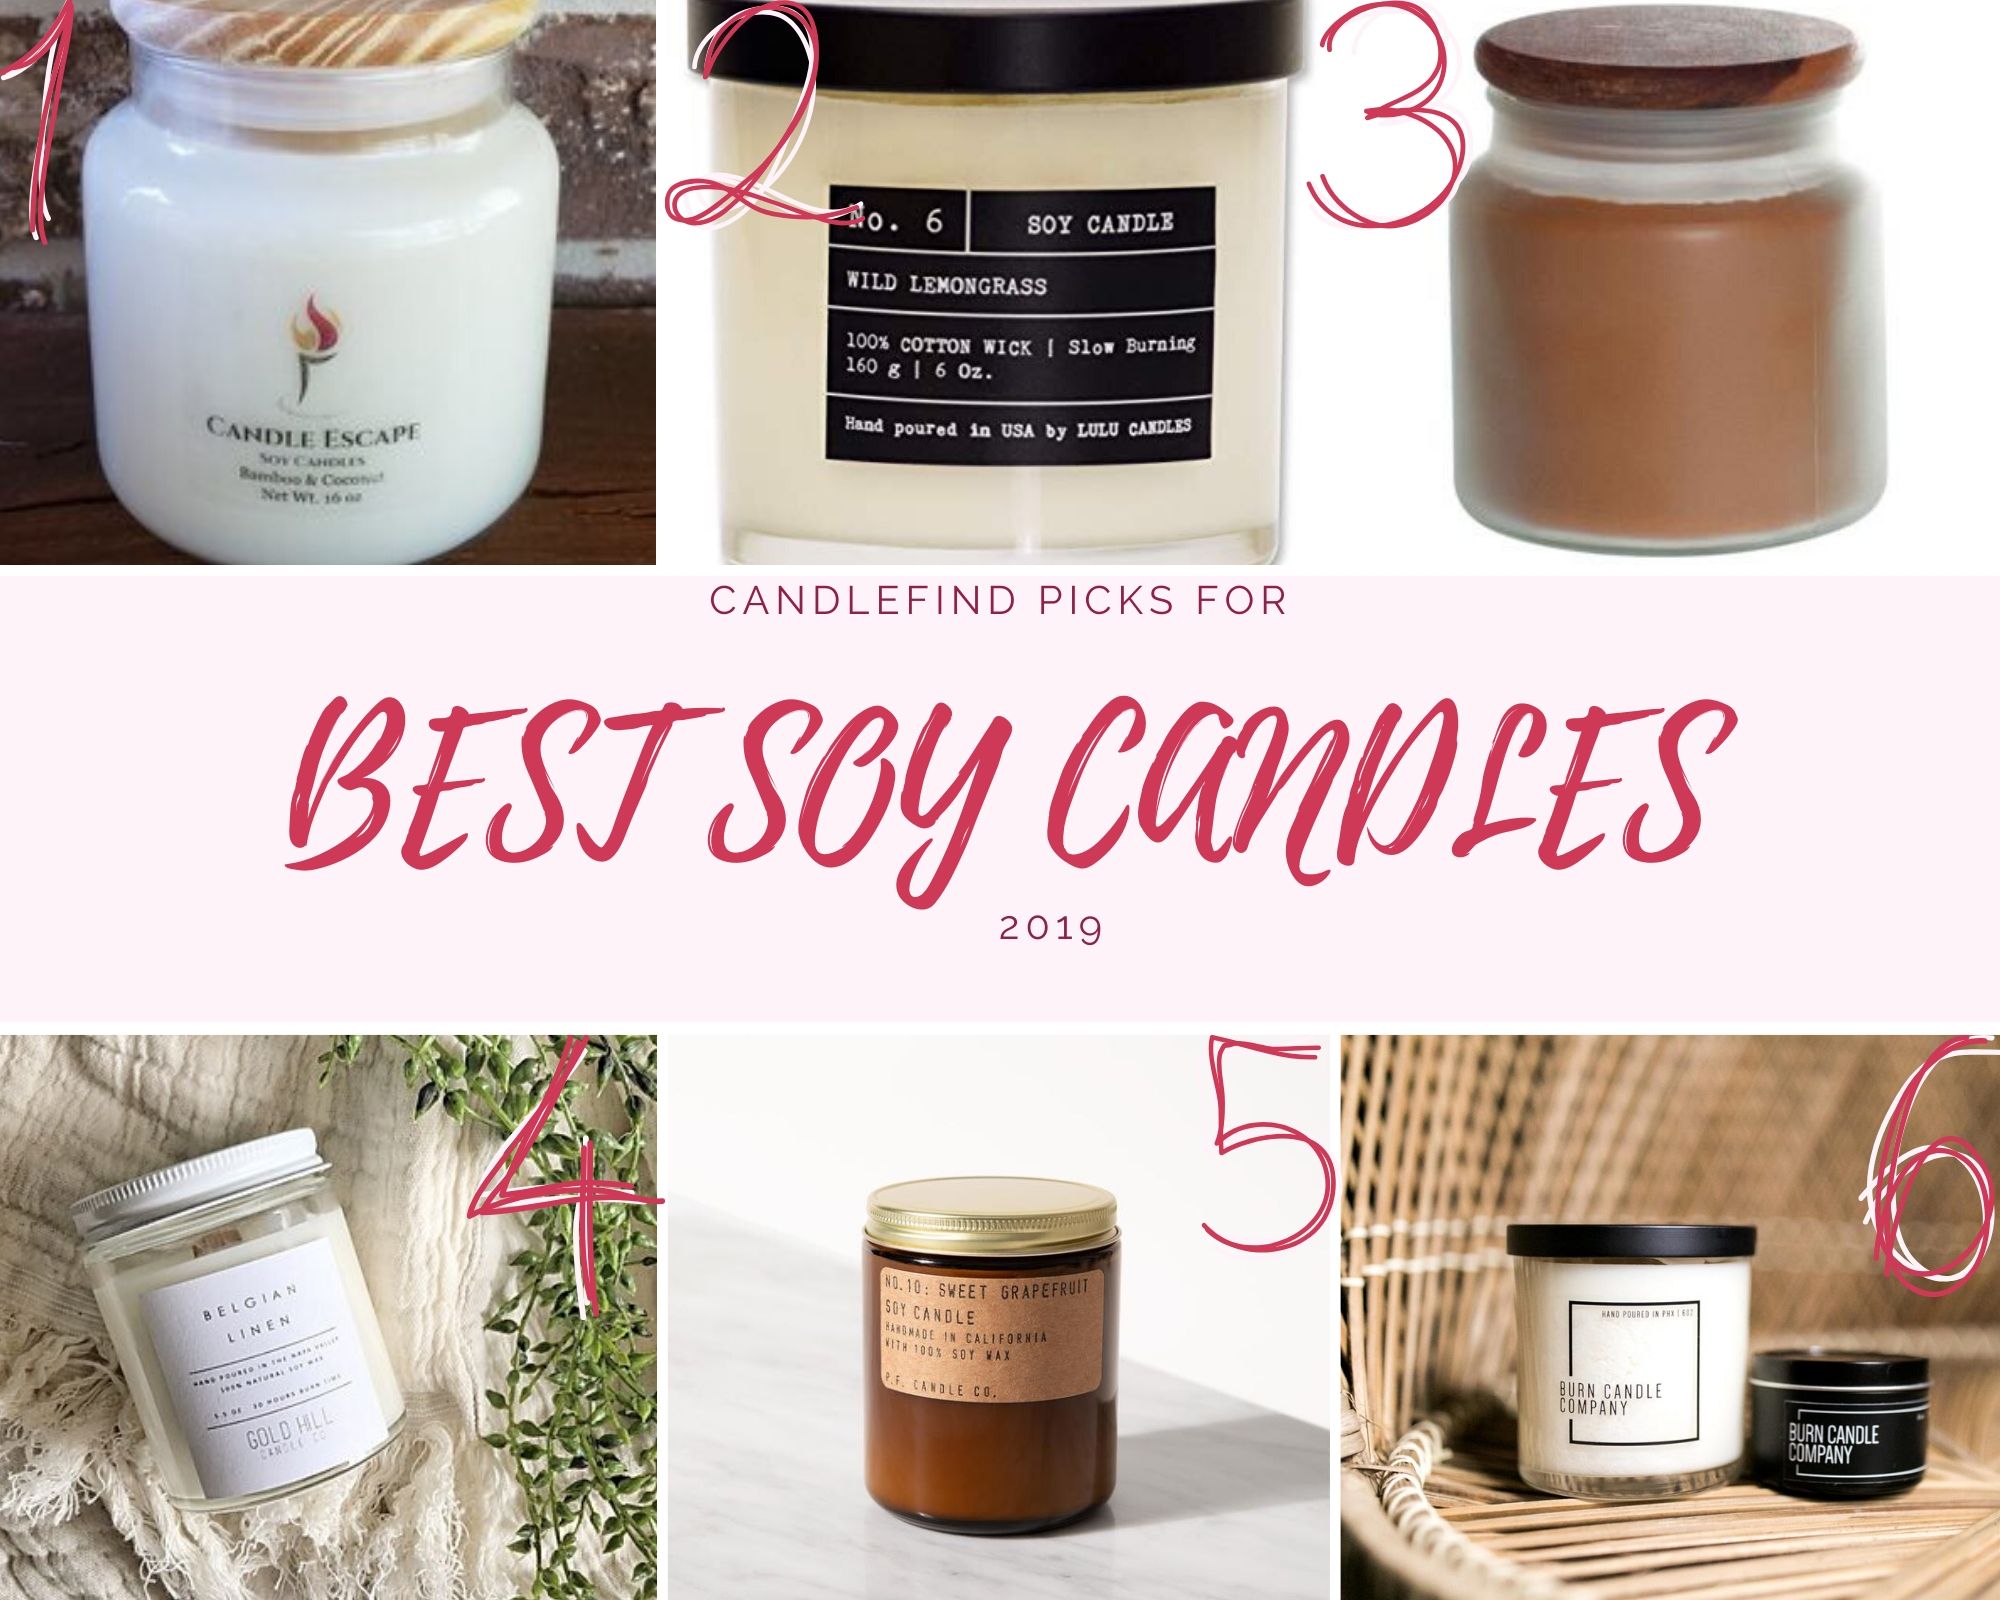 Best Soy Candles 2019